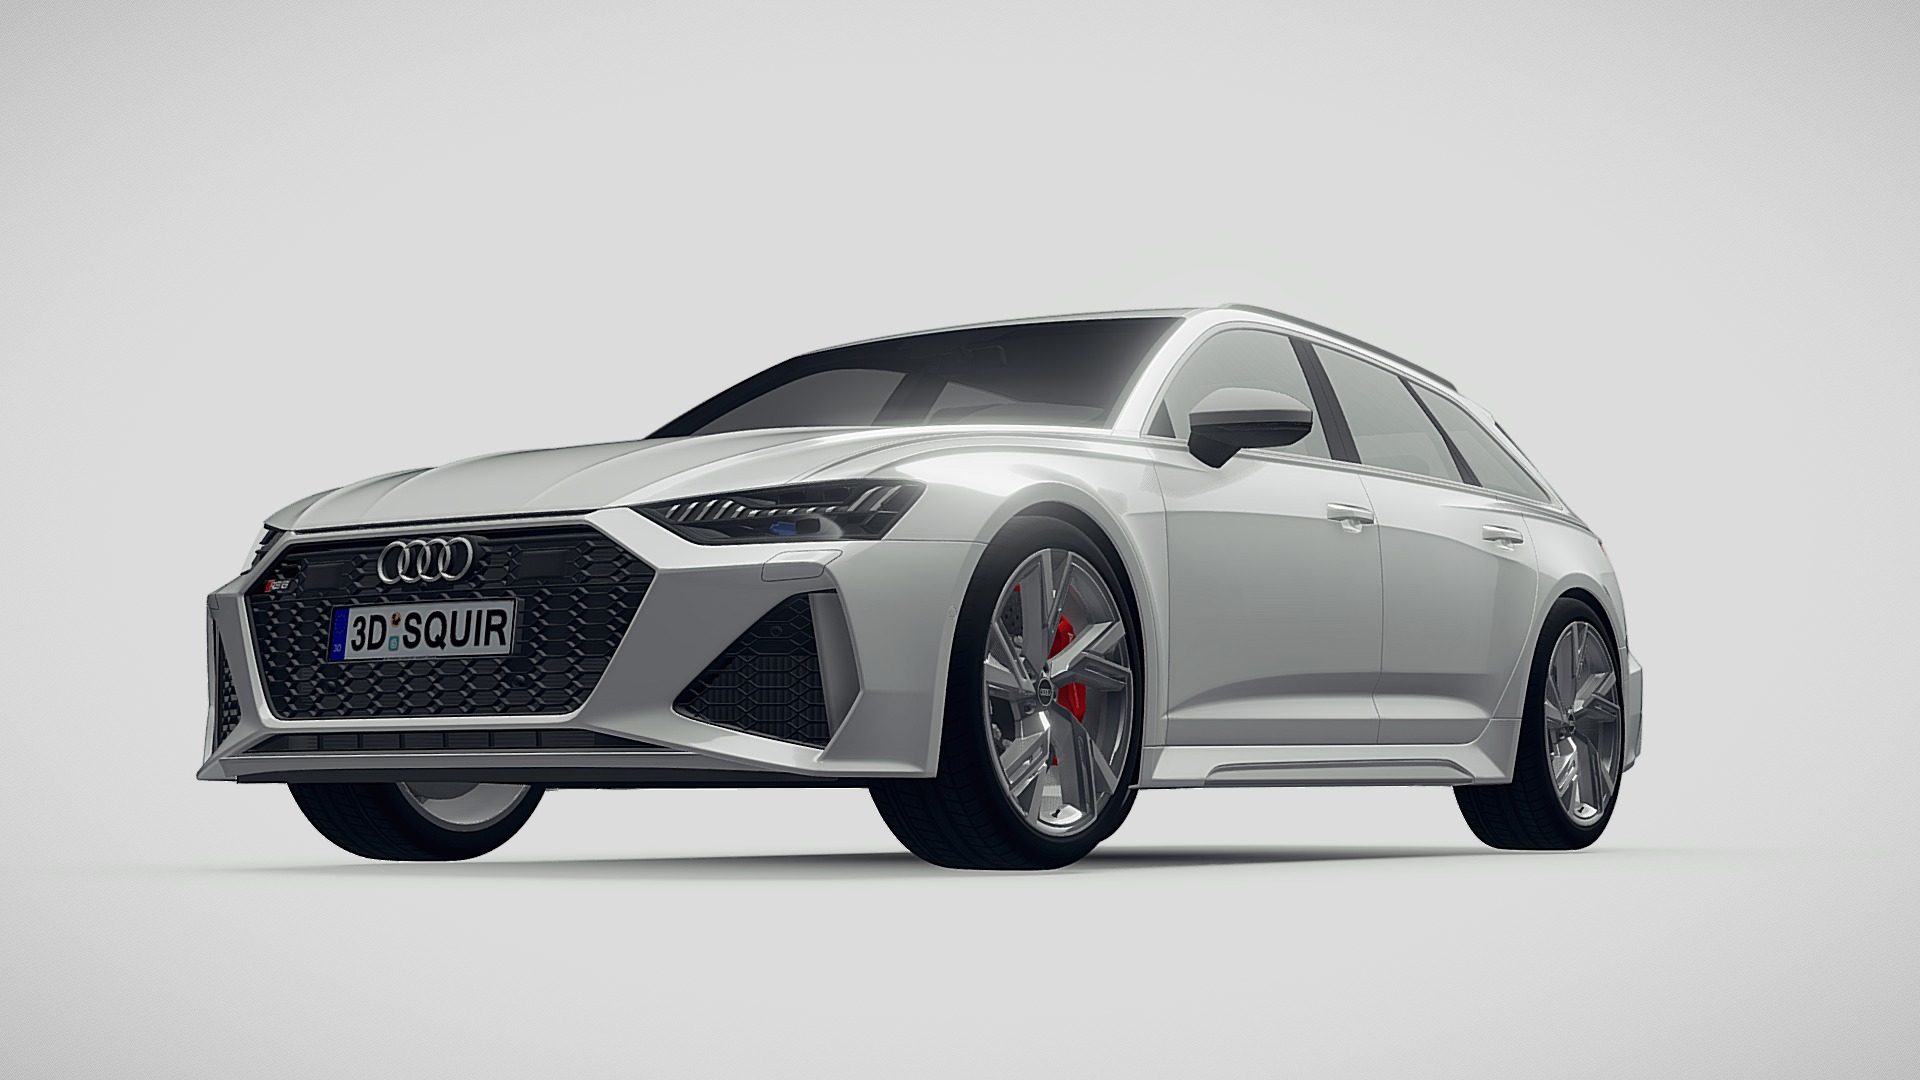 3D model Audi RS6 Avant 2020 - This is a 3D model of the Audi RS6 Avant 2020. The 3D model is about a silver car with red rims.